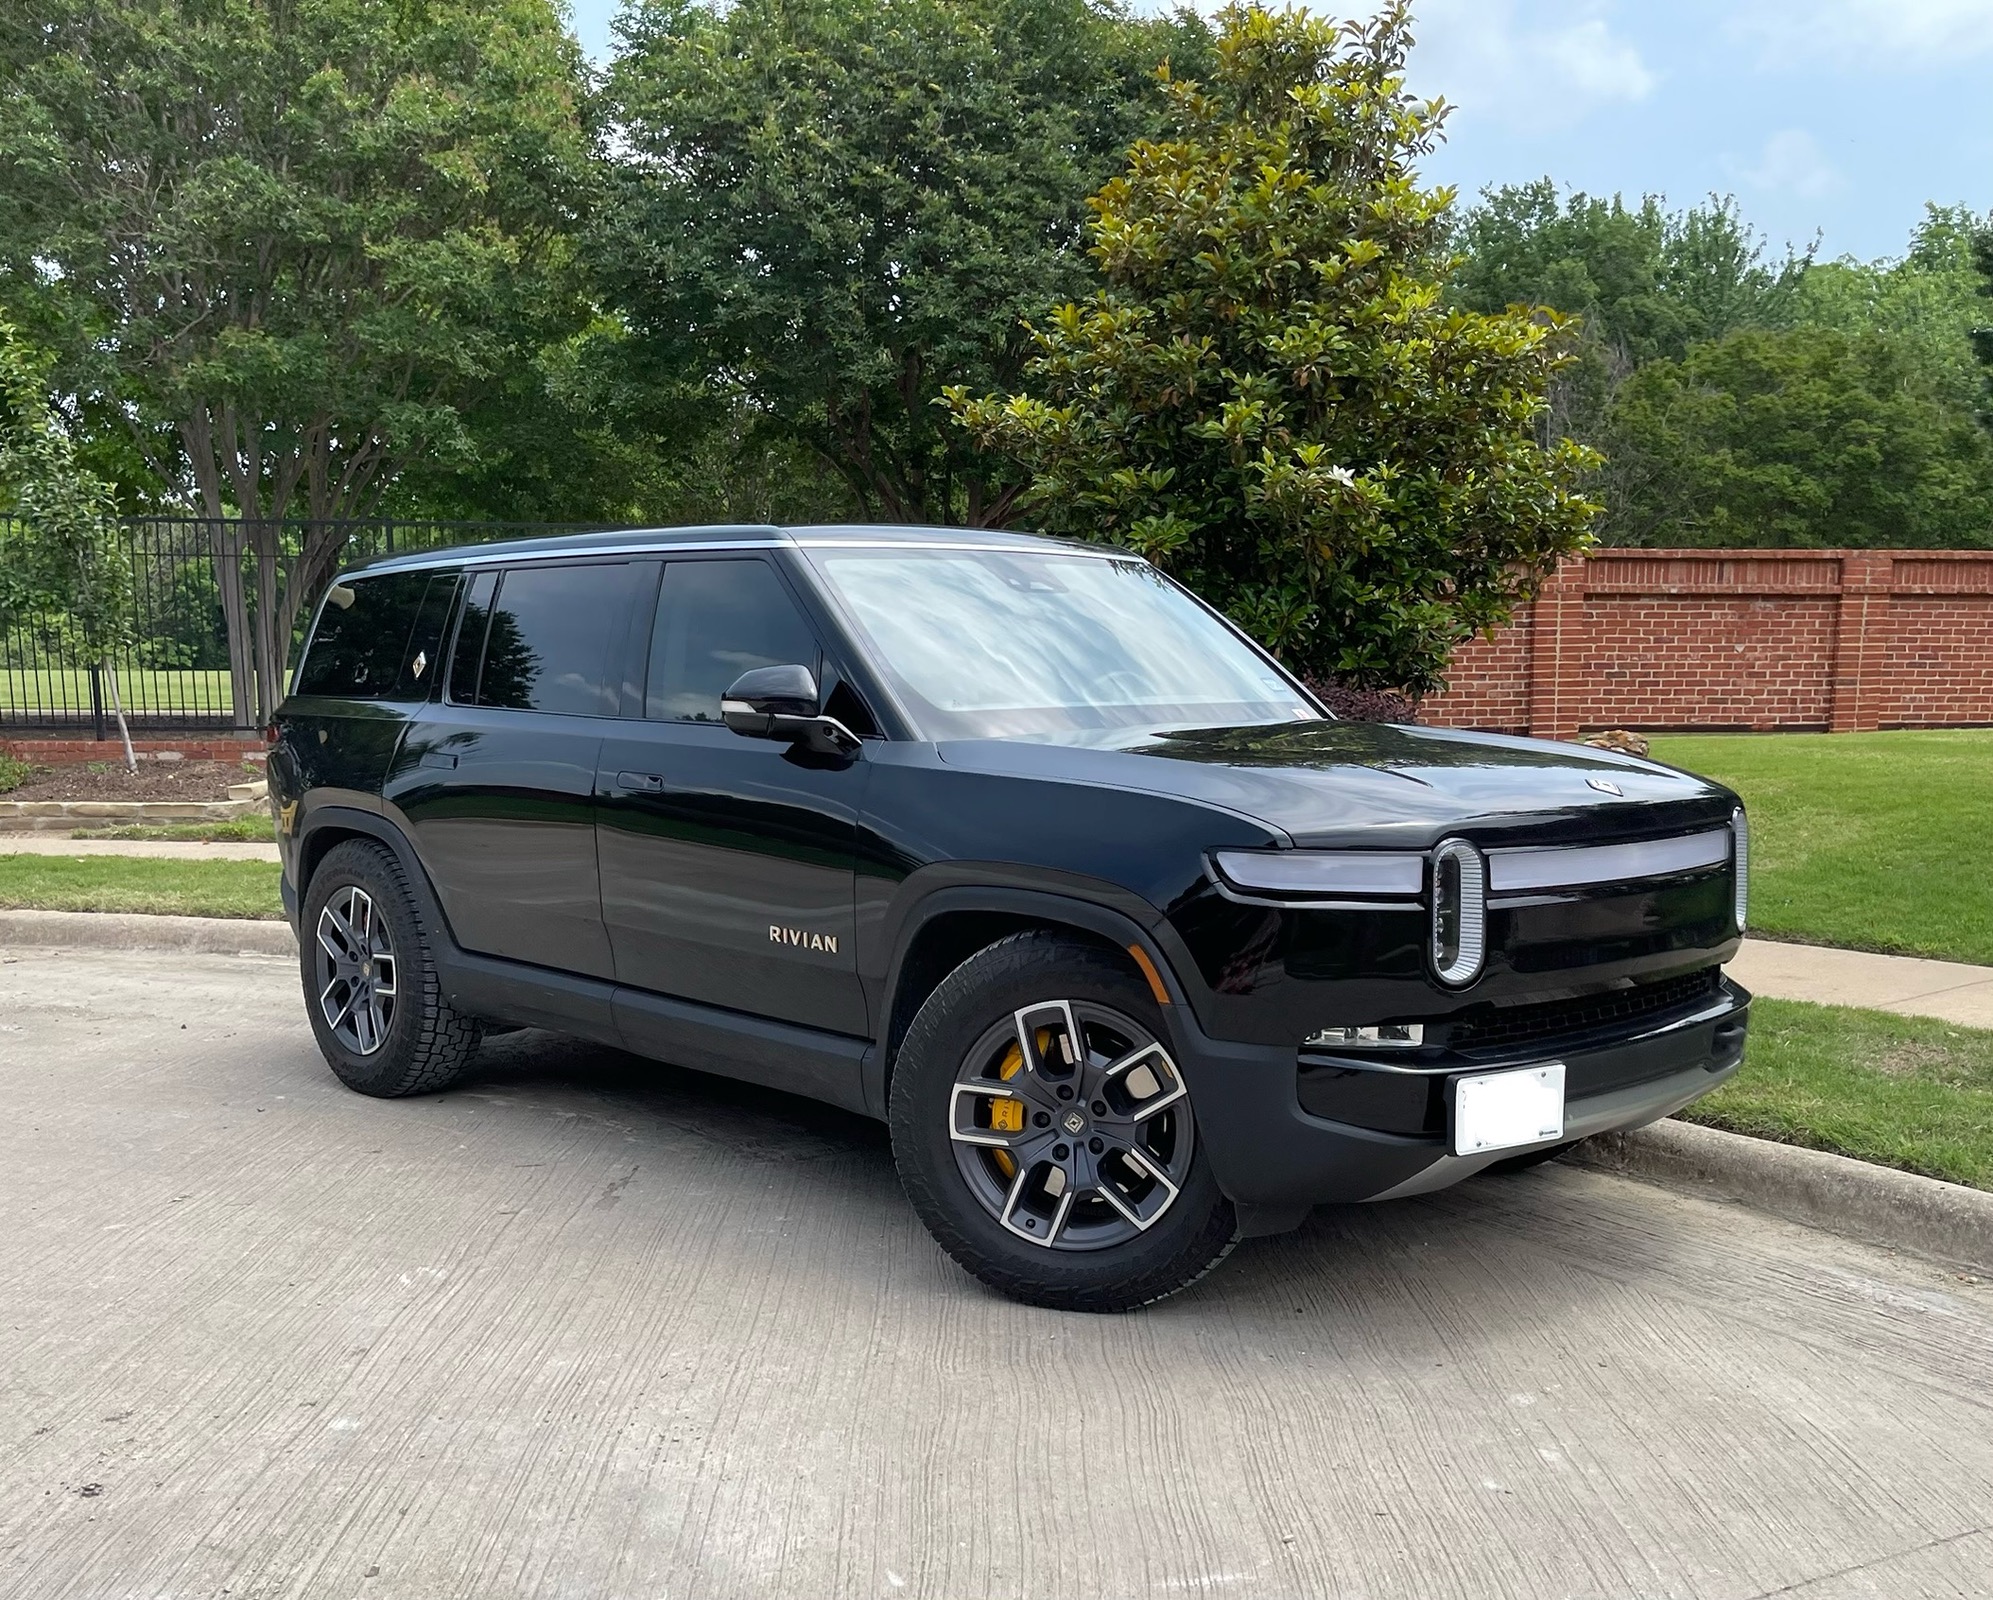 Rivian R1T R1S Random Rivian Photos of the Day - Post Yours! 📸 🤳 IMG_0326